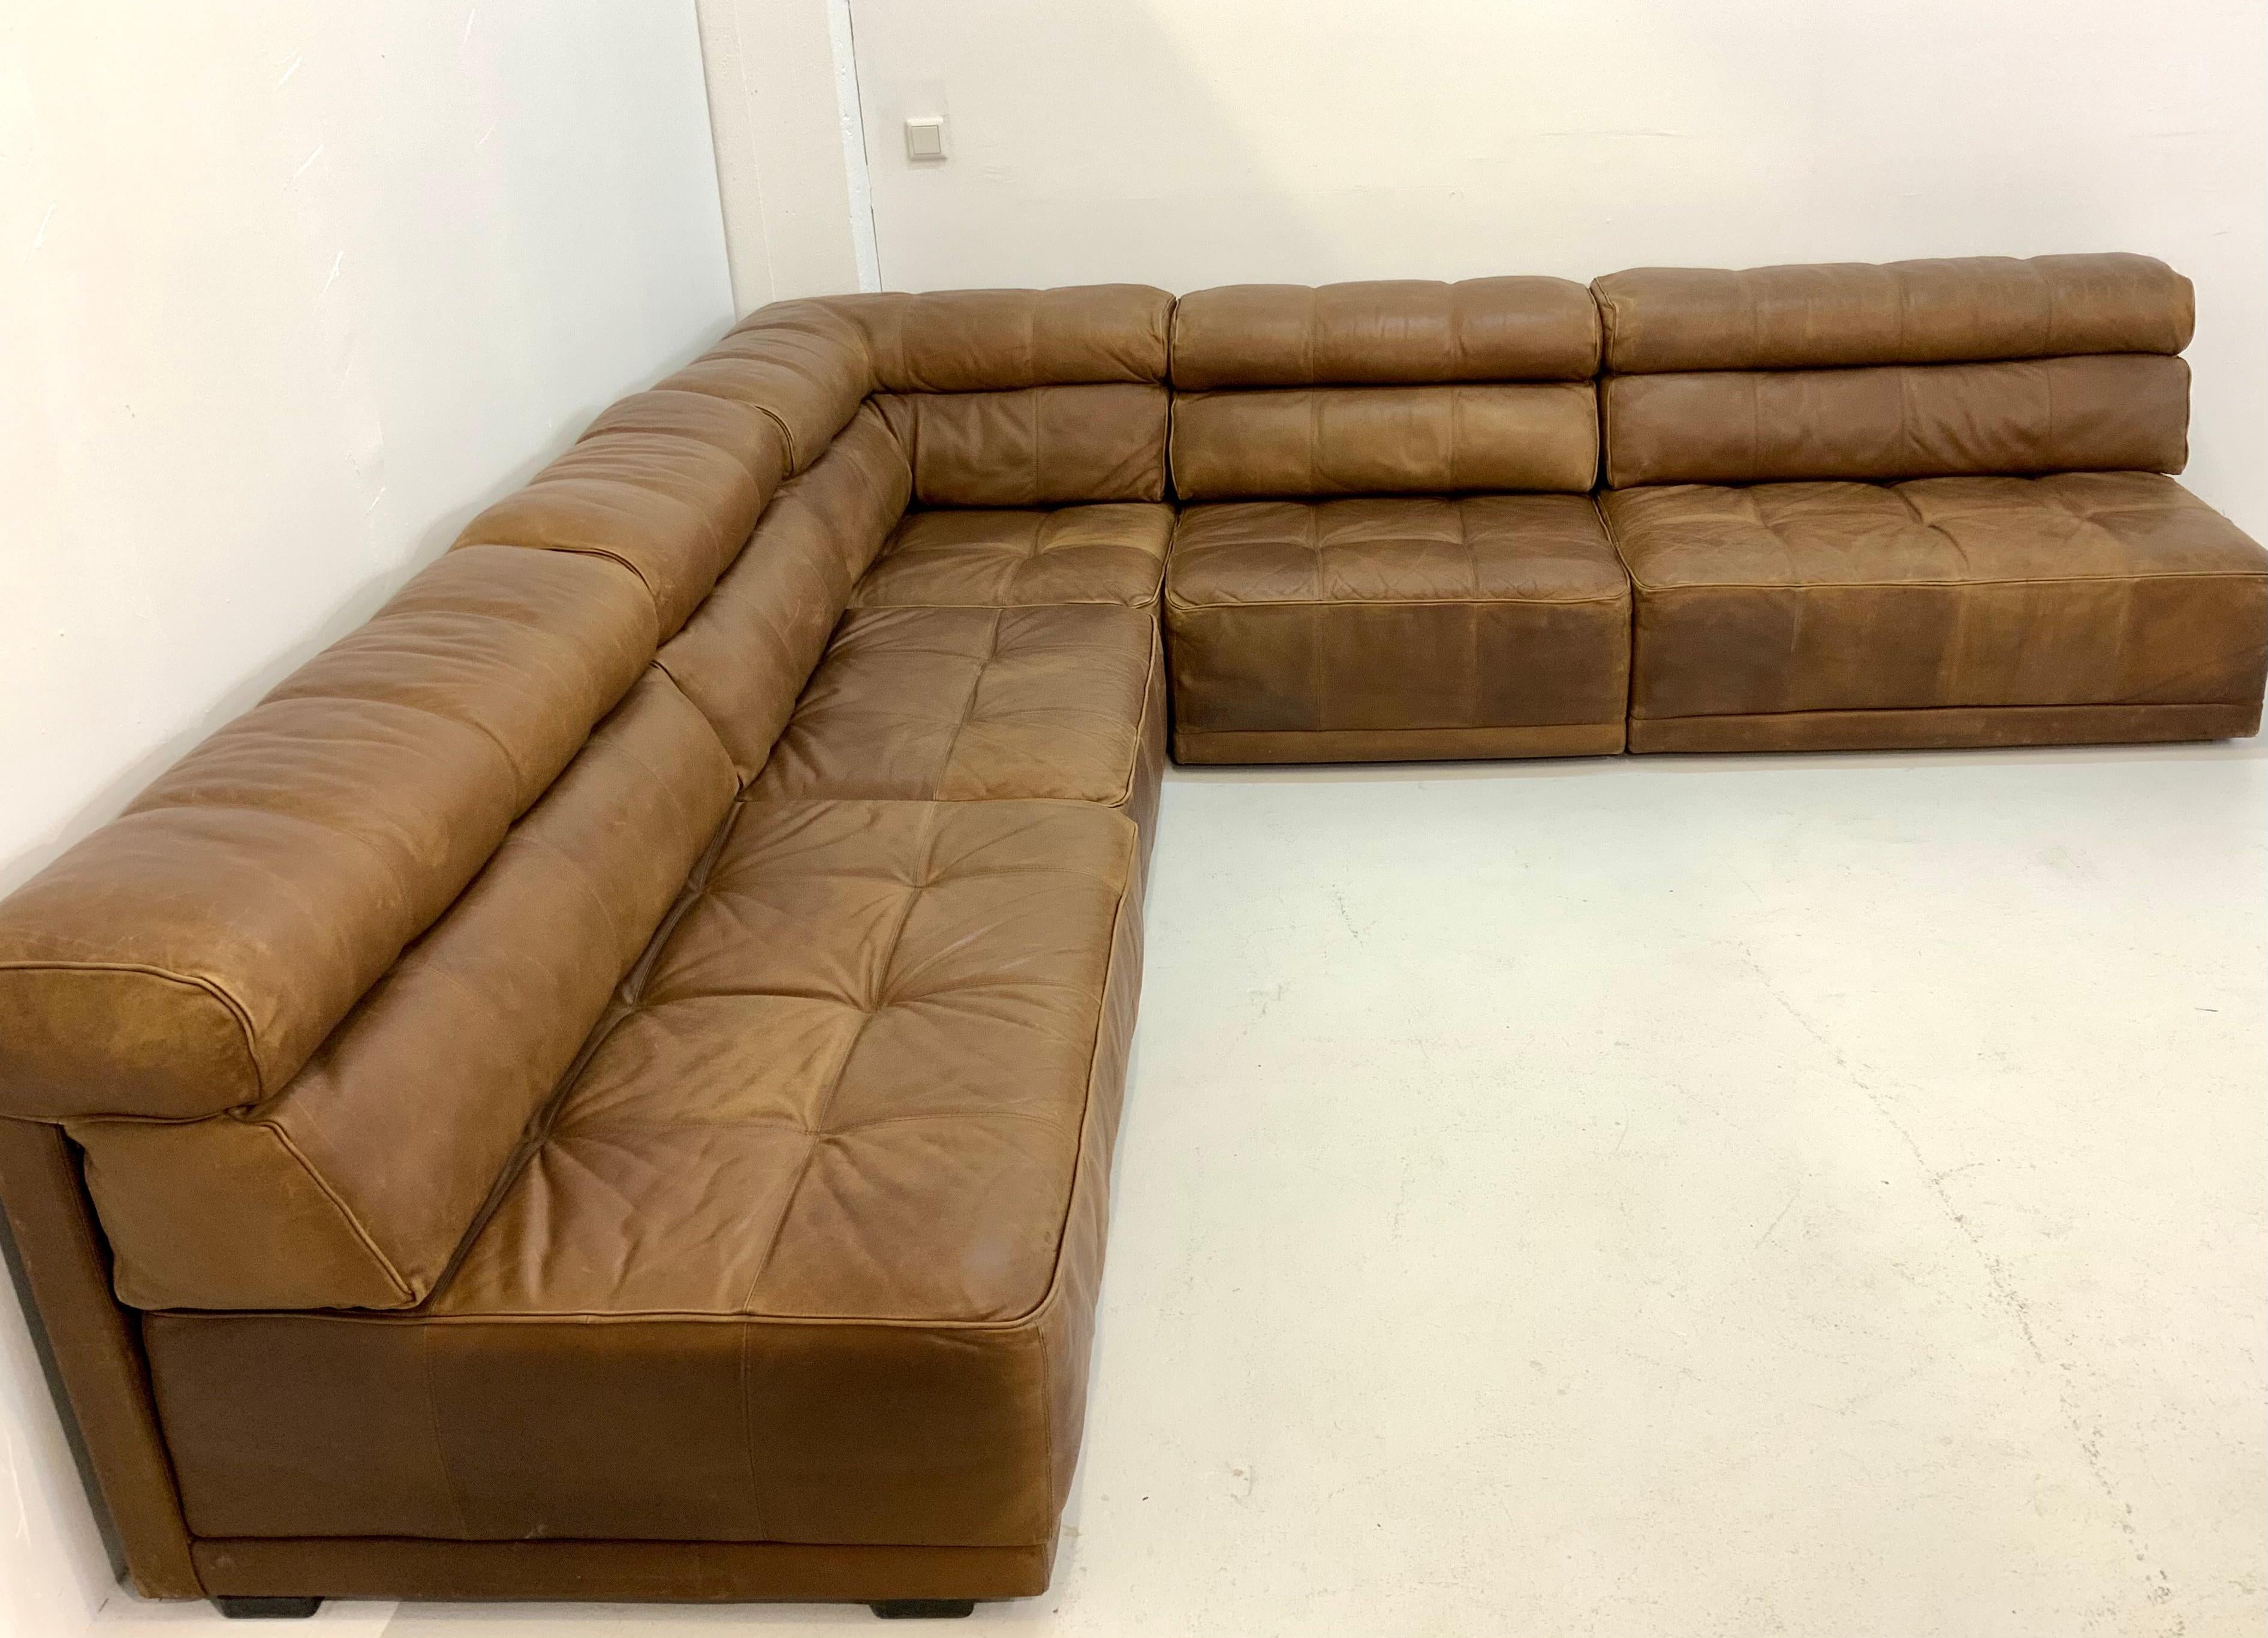 70's couch